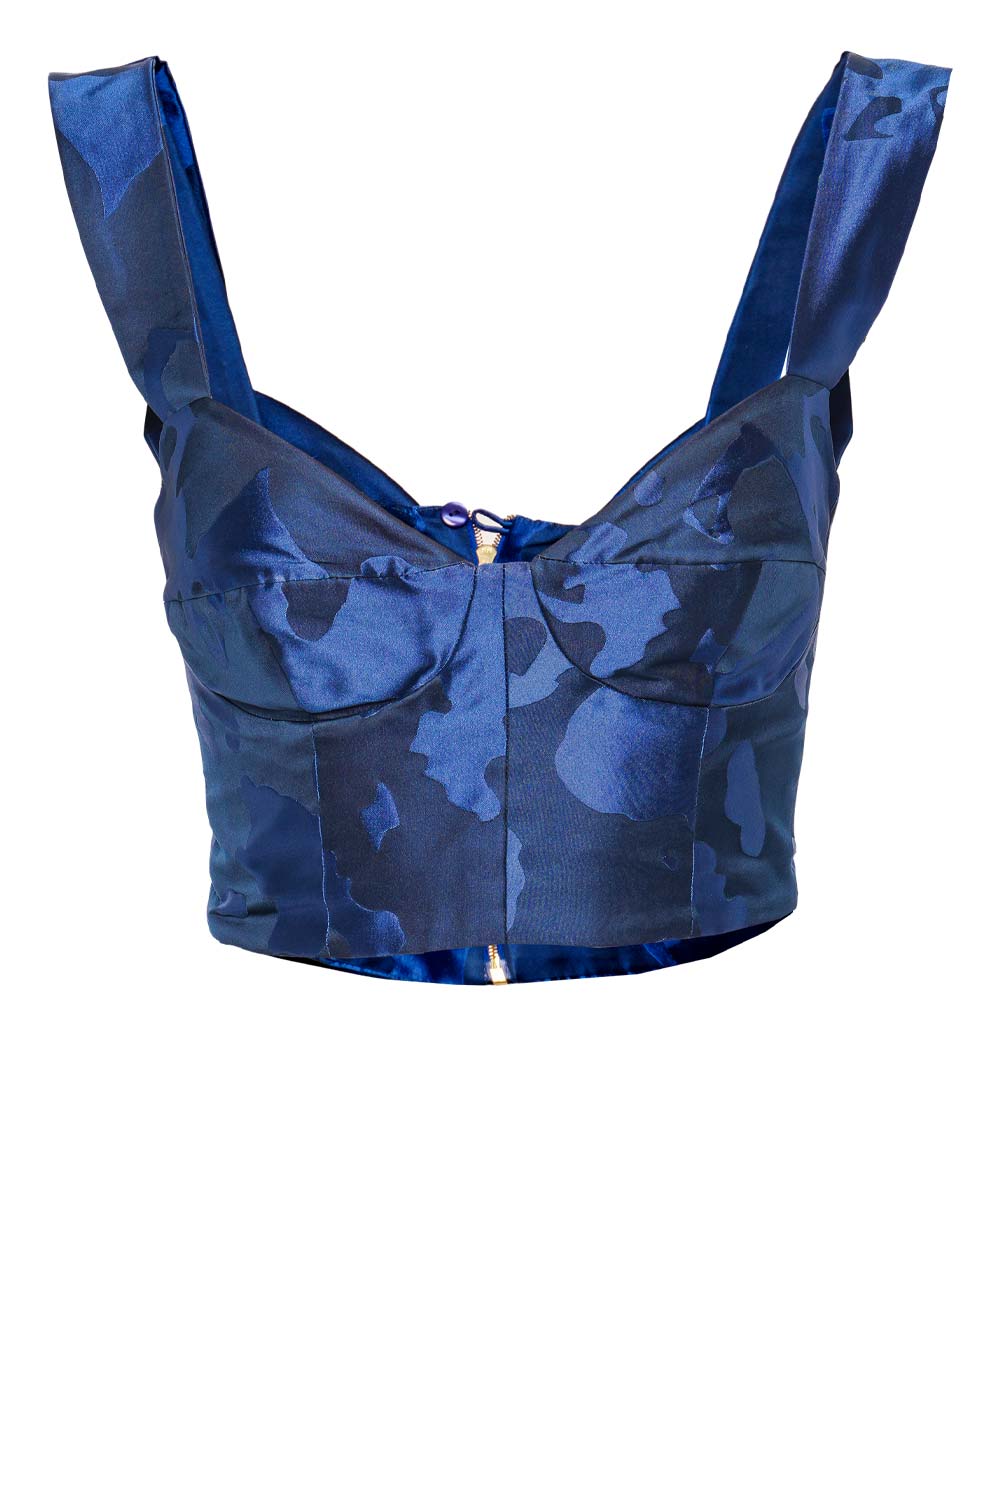 Silvia Tcherassi Nuoro Navy Jacquard Bustier Cropped Top